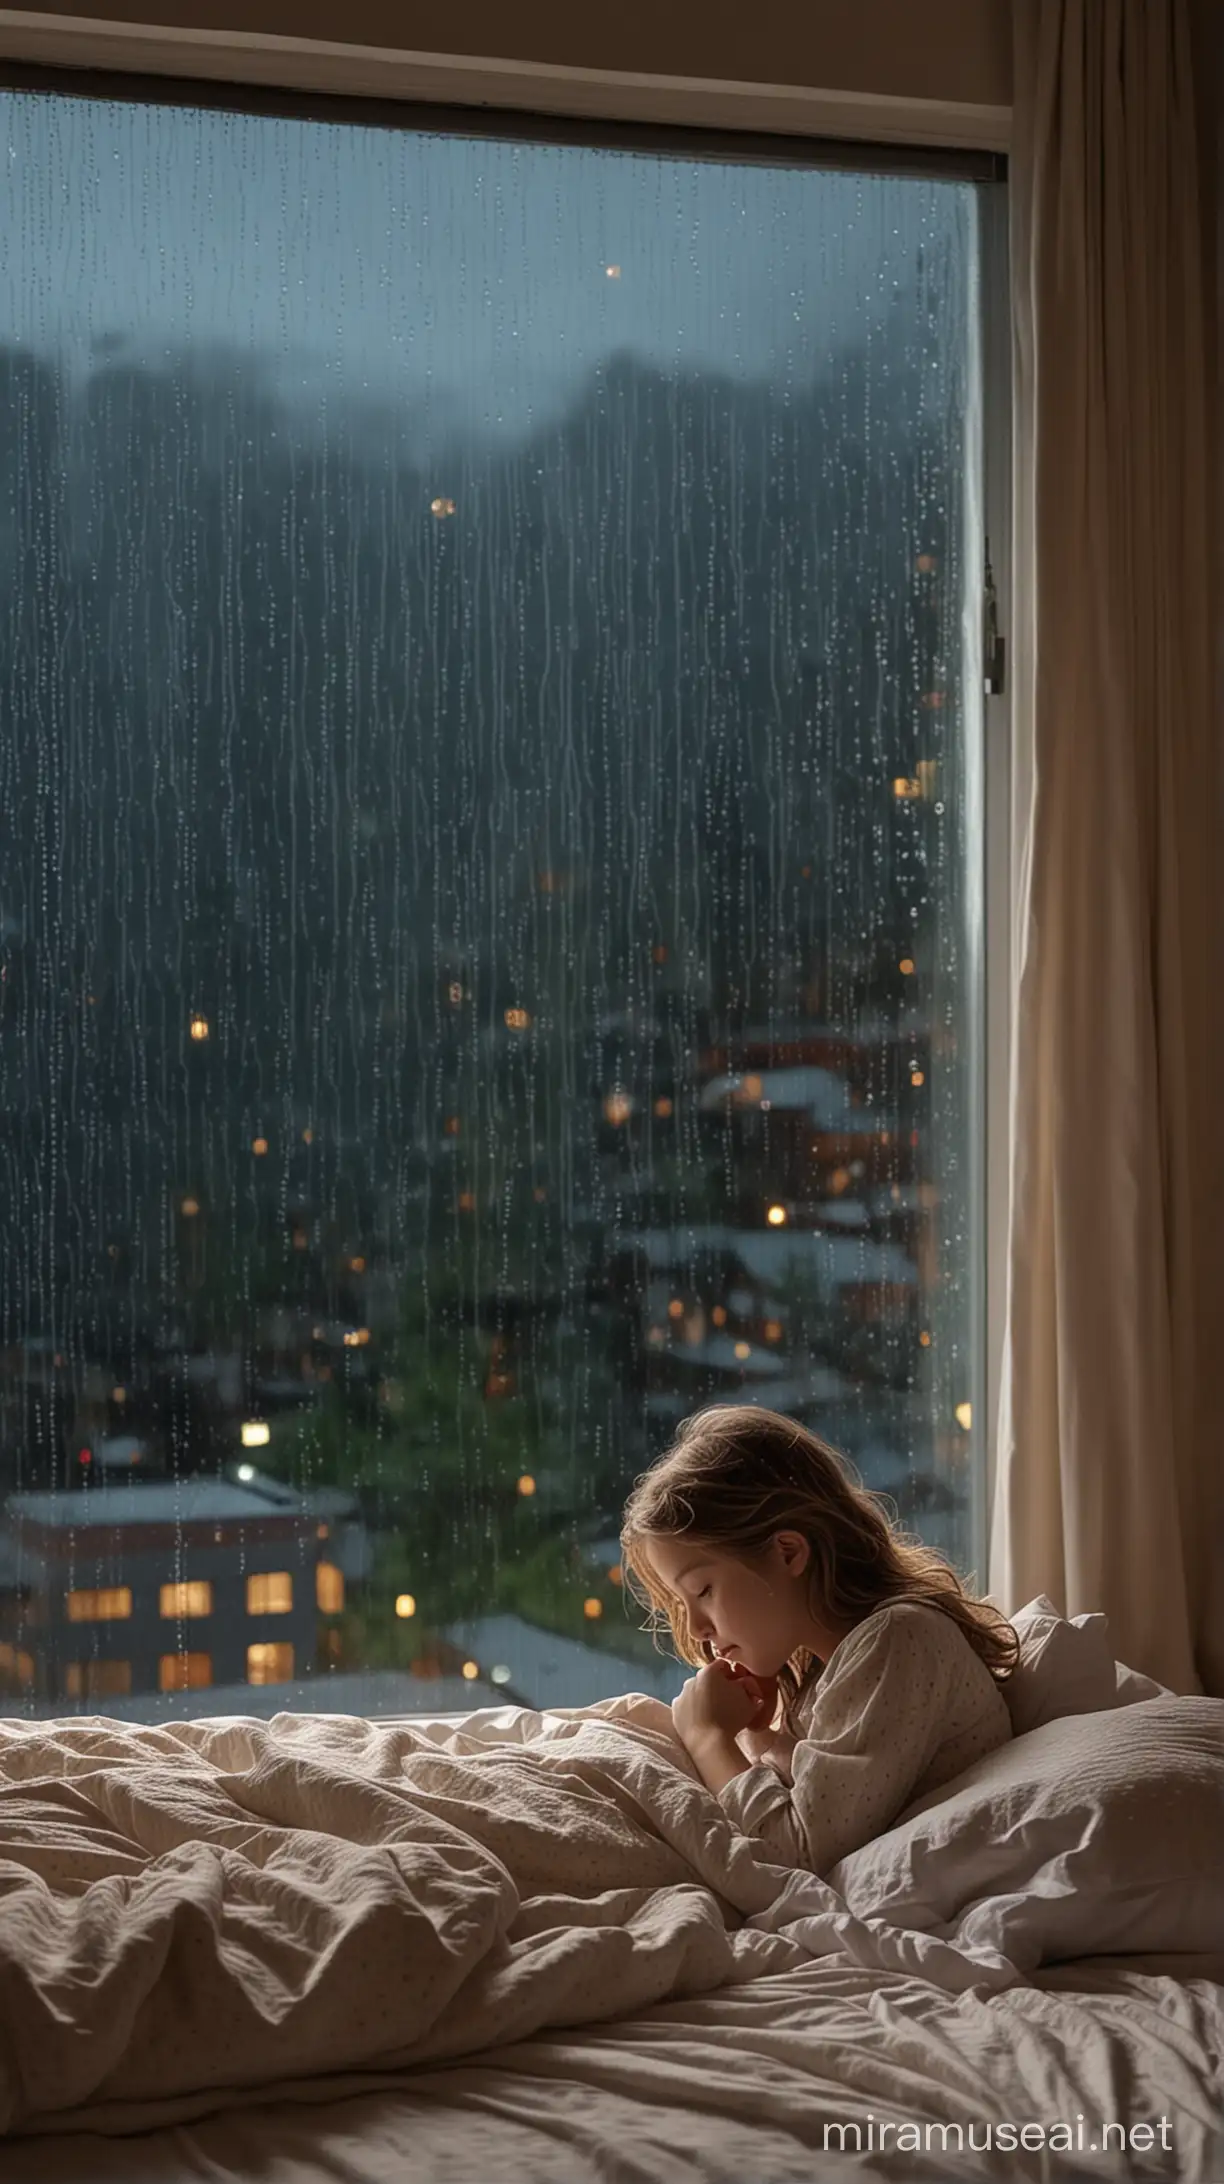 In front of the immense floor-to-ceiling glass window, the gentle night rain pours down like threads. A little girl lies quietly in bed by the window, sleeping soundly, surrounded by warmth and tranquility.